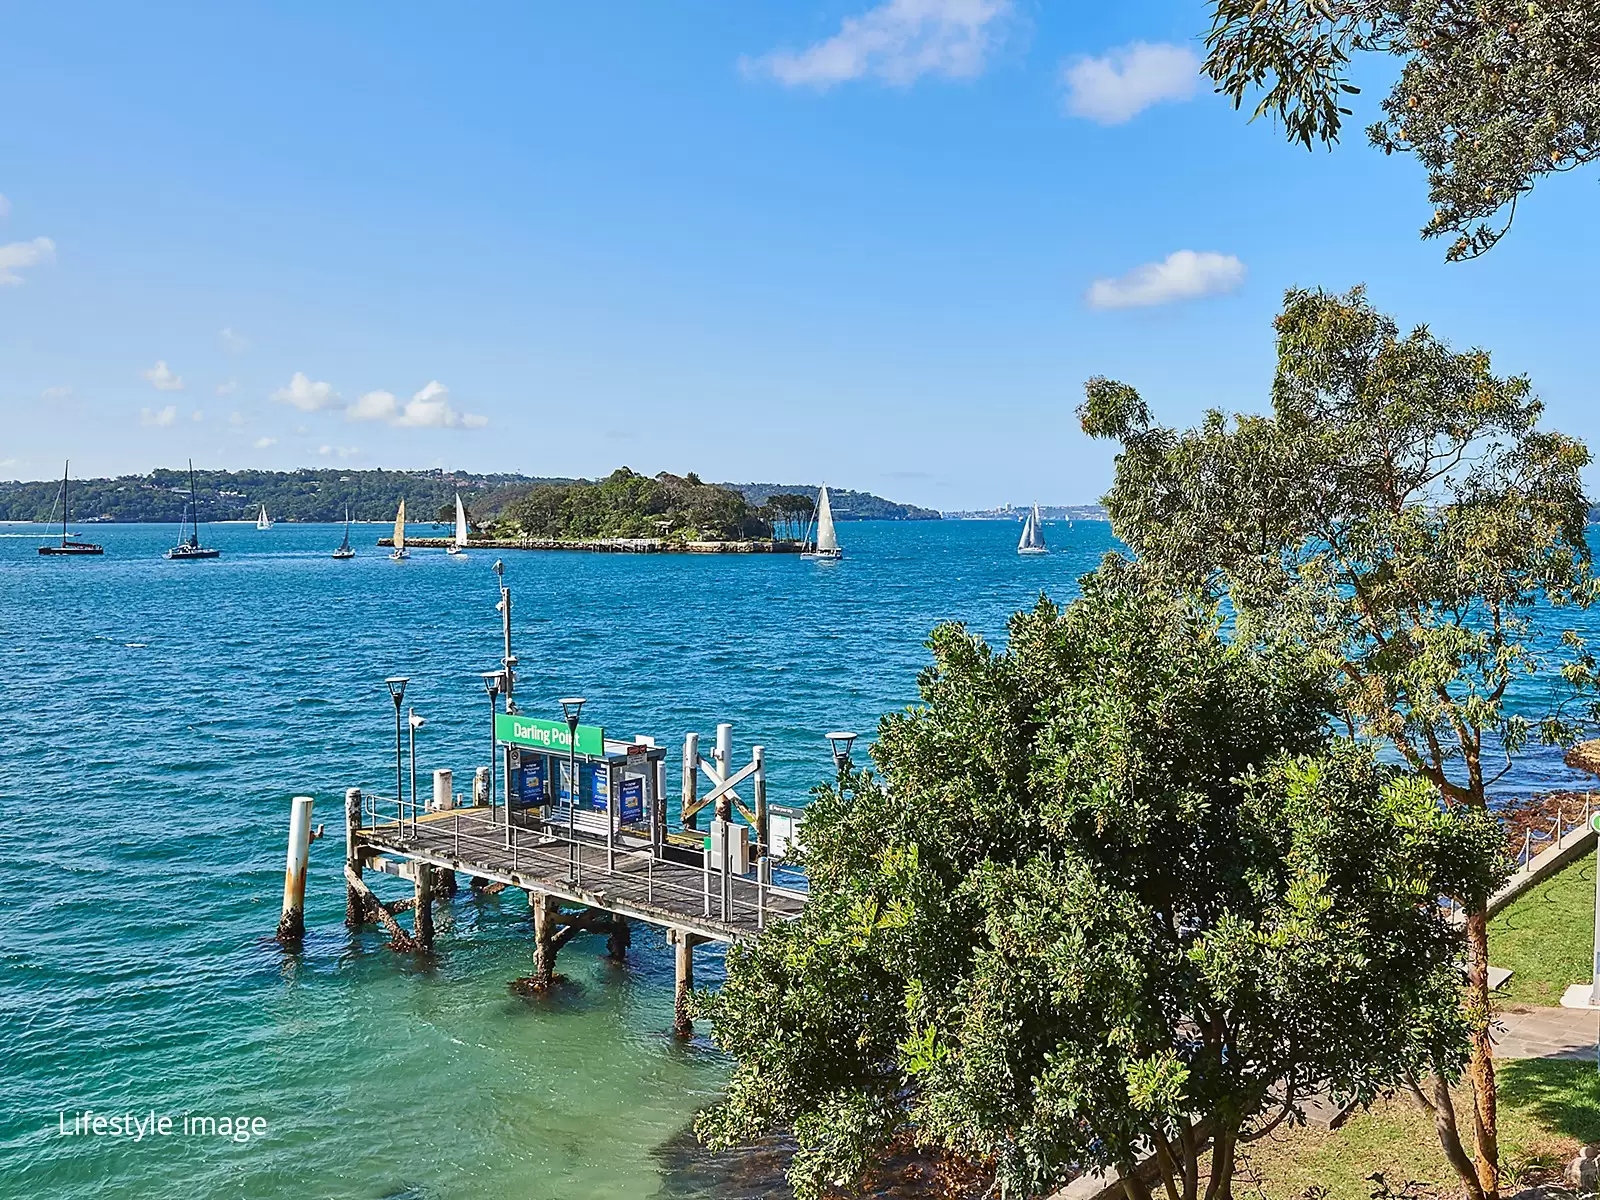 Photo #24: 59/11 Yarranabbe Road, Darling Point - Sold by Sydney Sotheby's International Realty